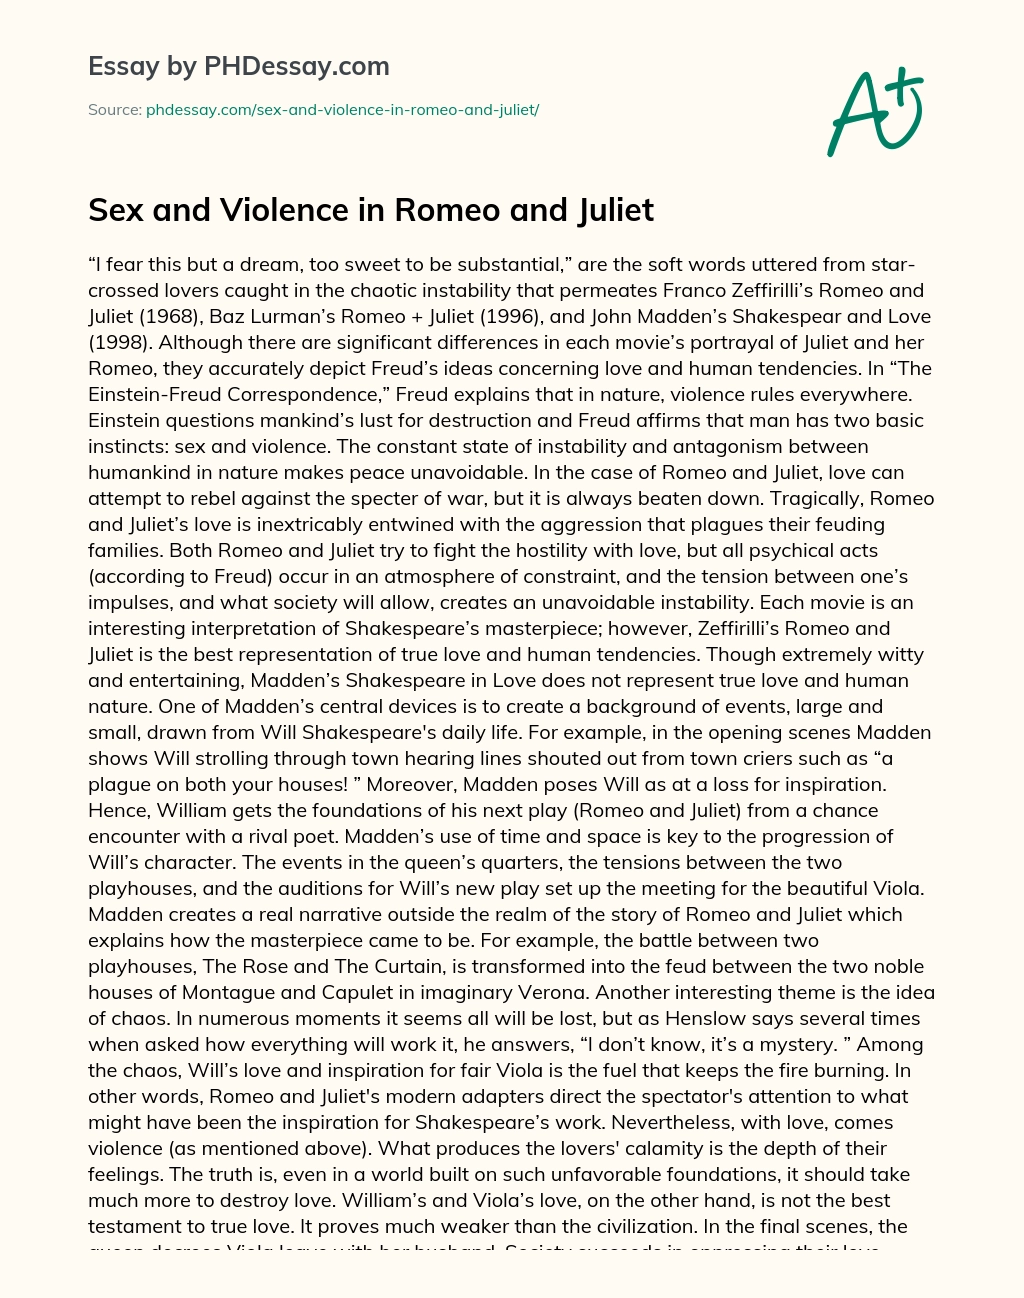 Sex and Violence in Romeo and Juliet essay